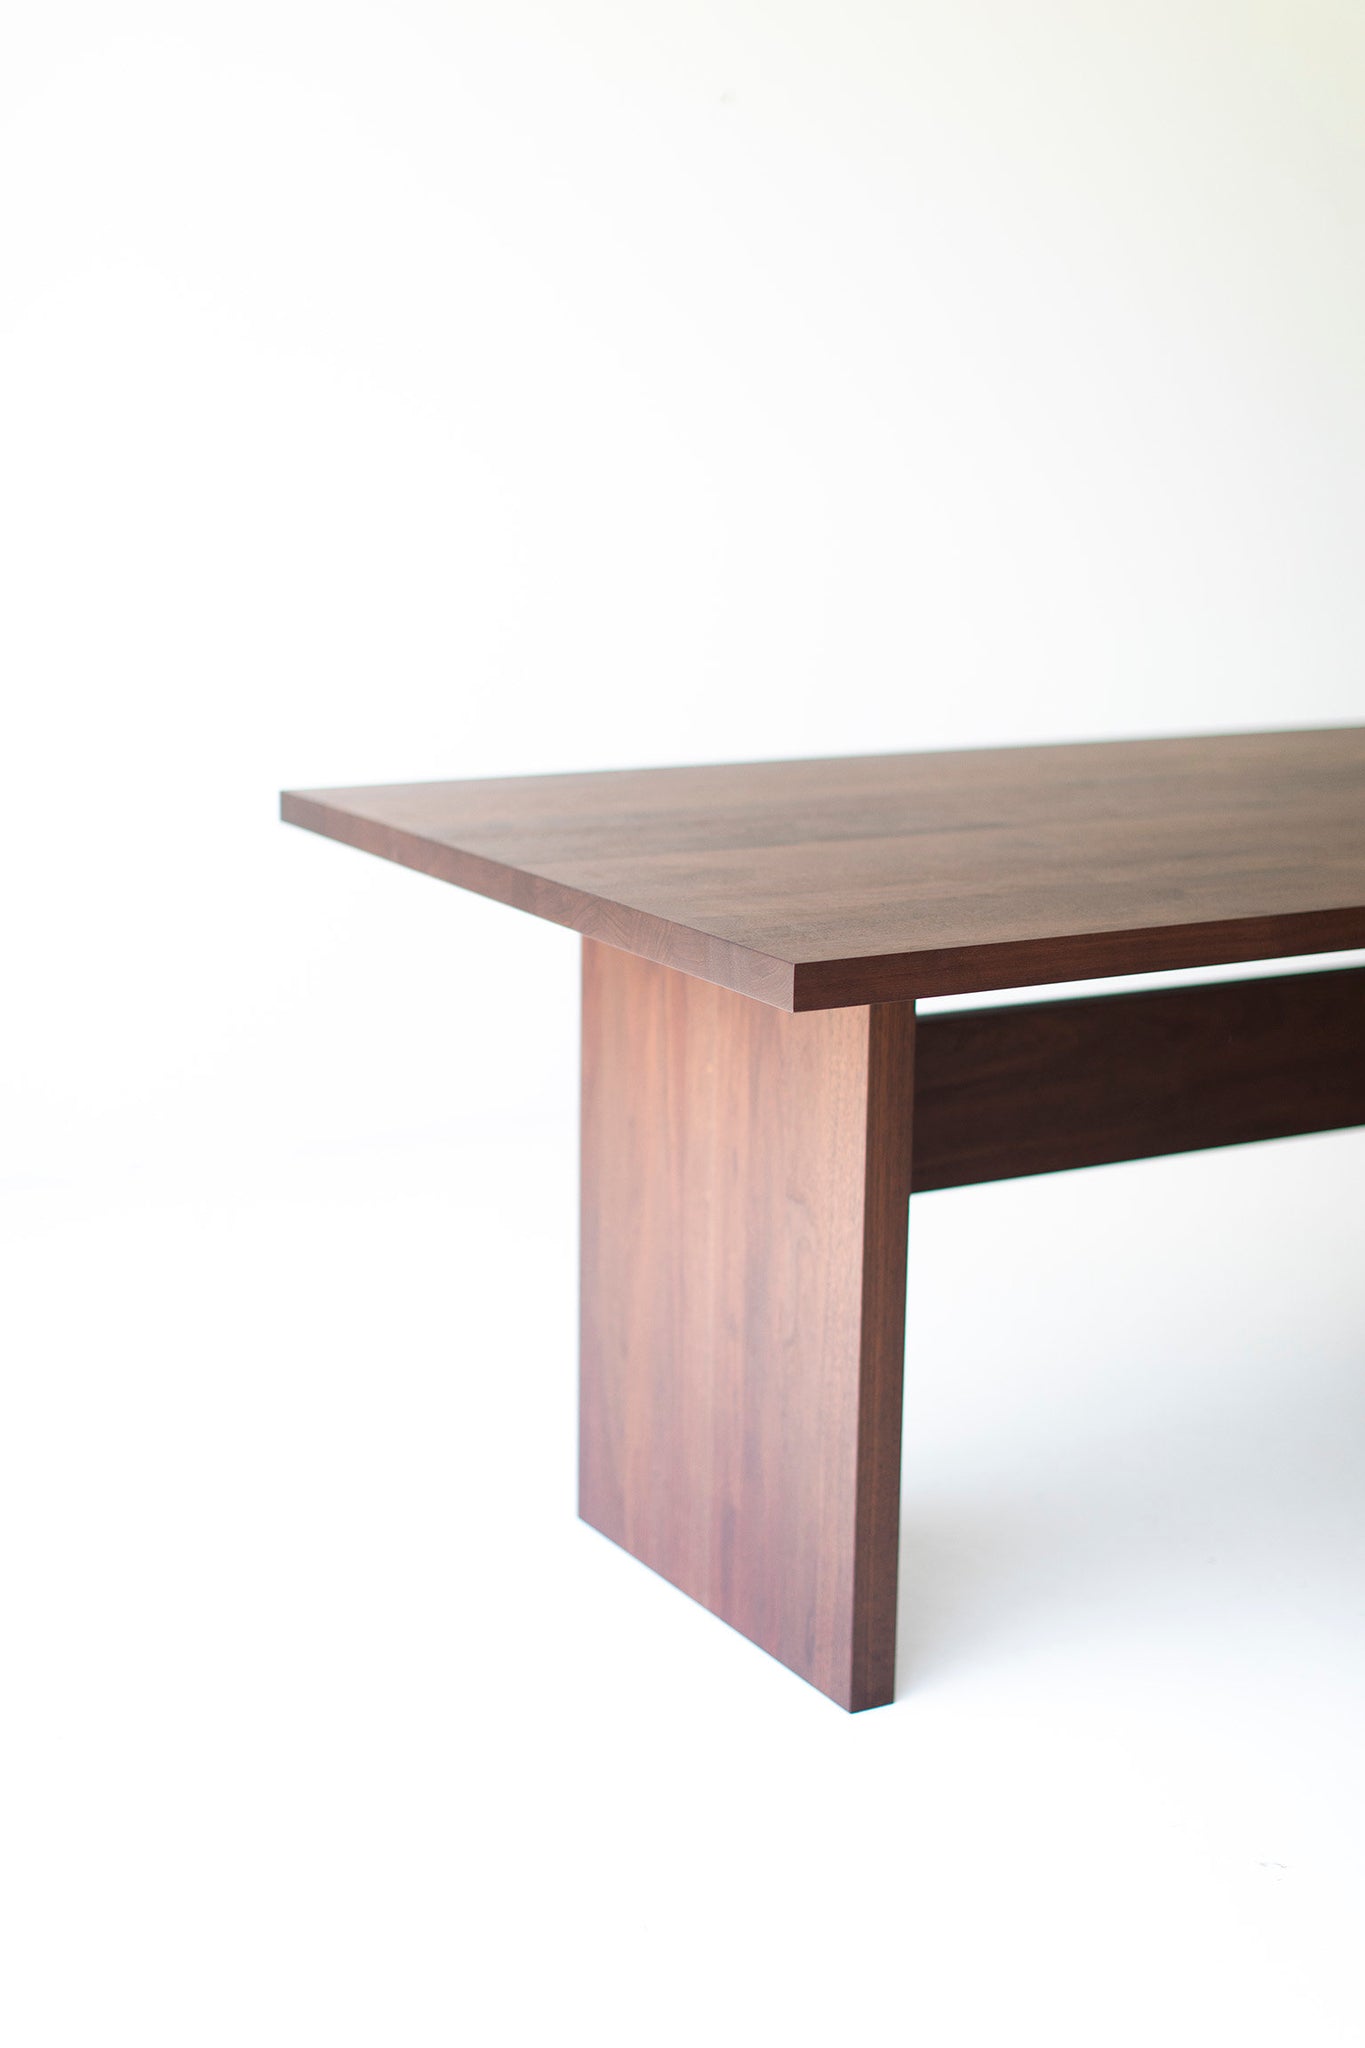 Modern Dining Table 0718 Toko Table, Image 07